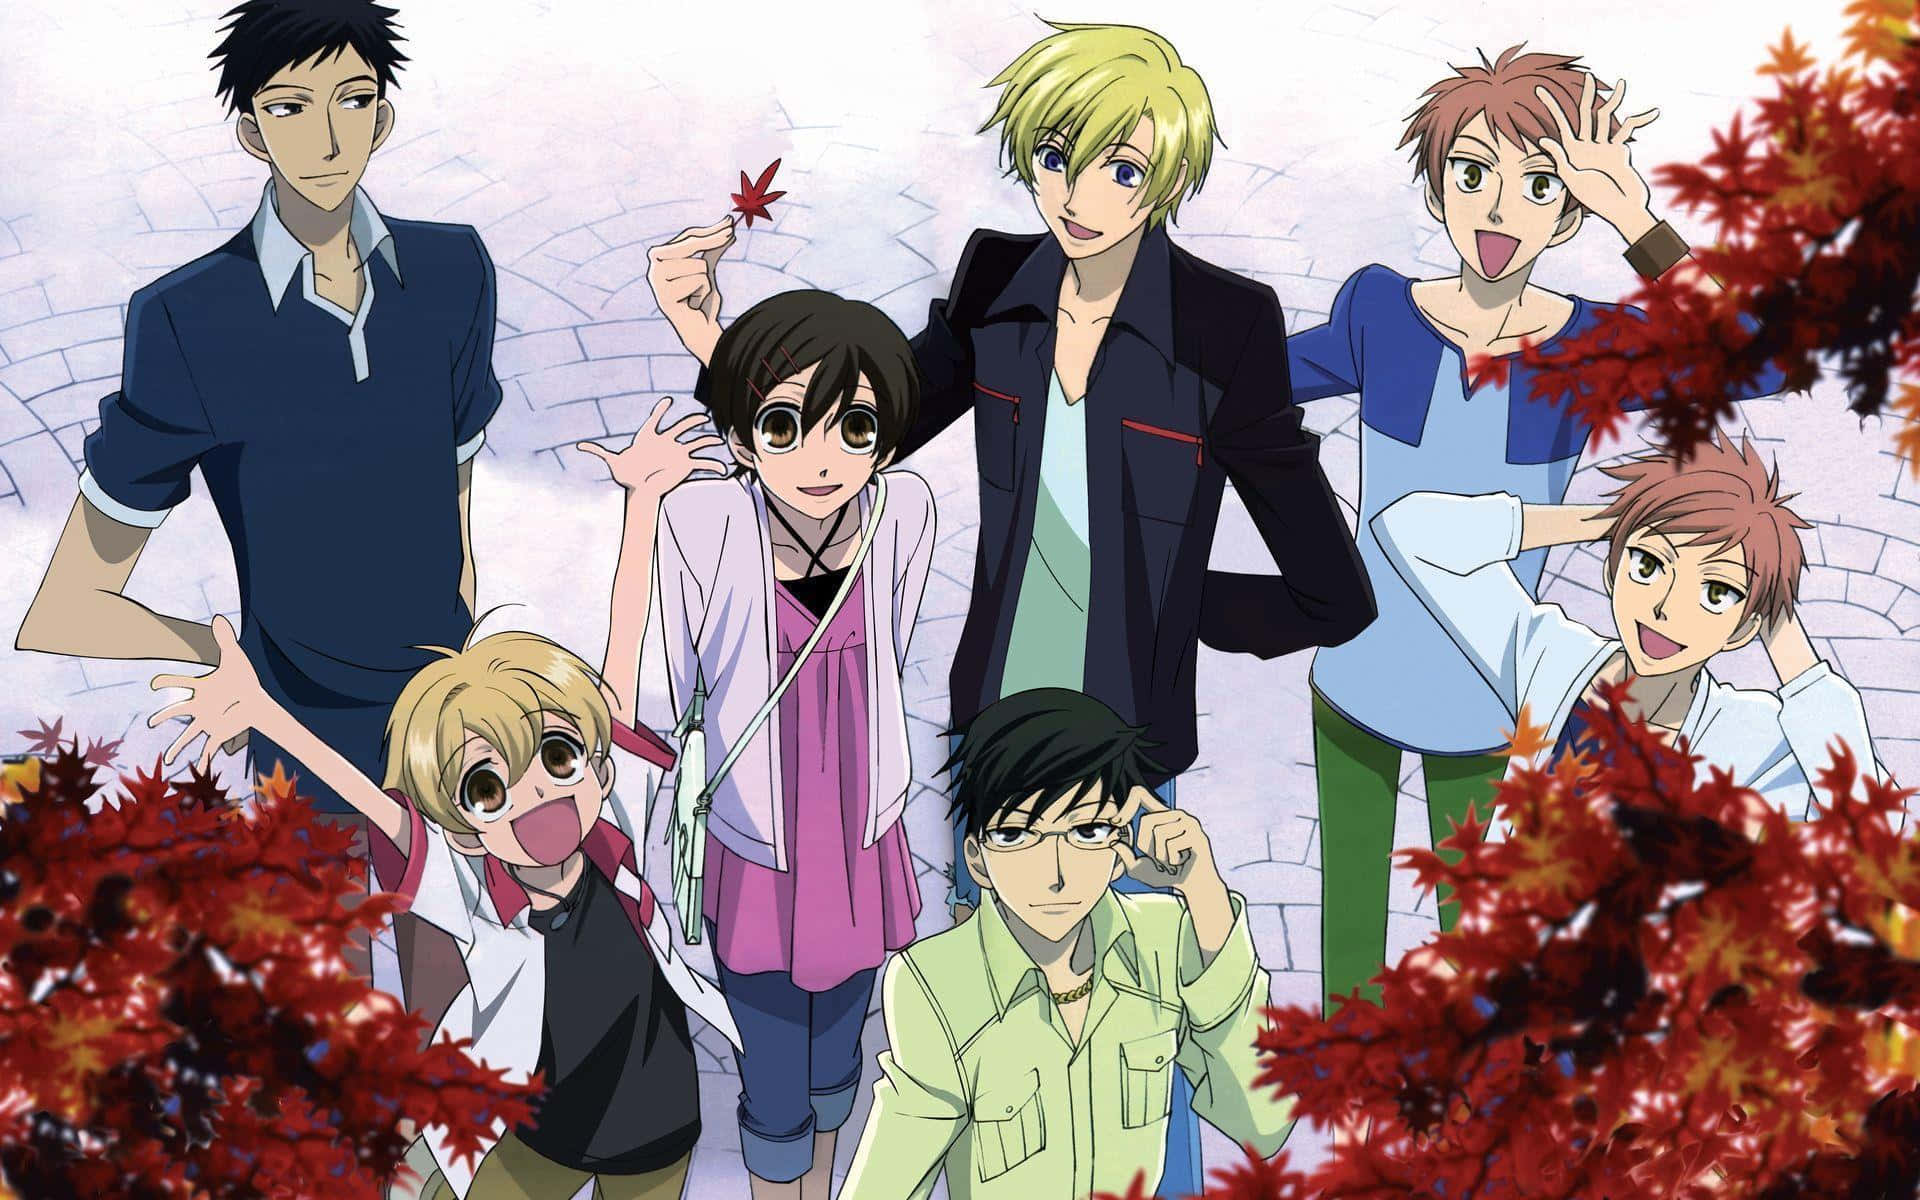 The Ouran High School Host Club Group Photo Wallpaper